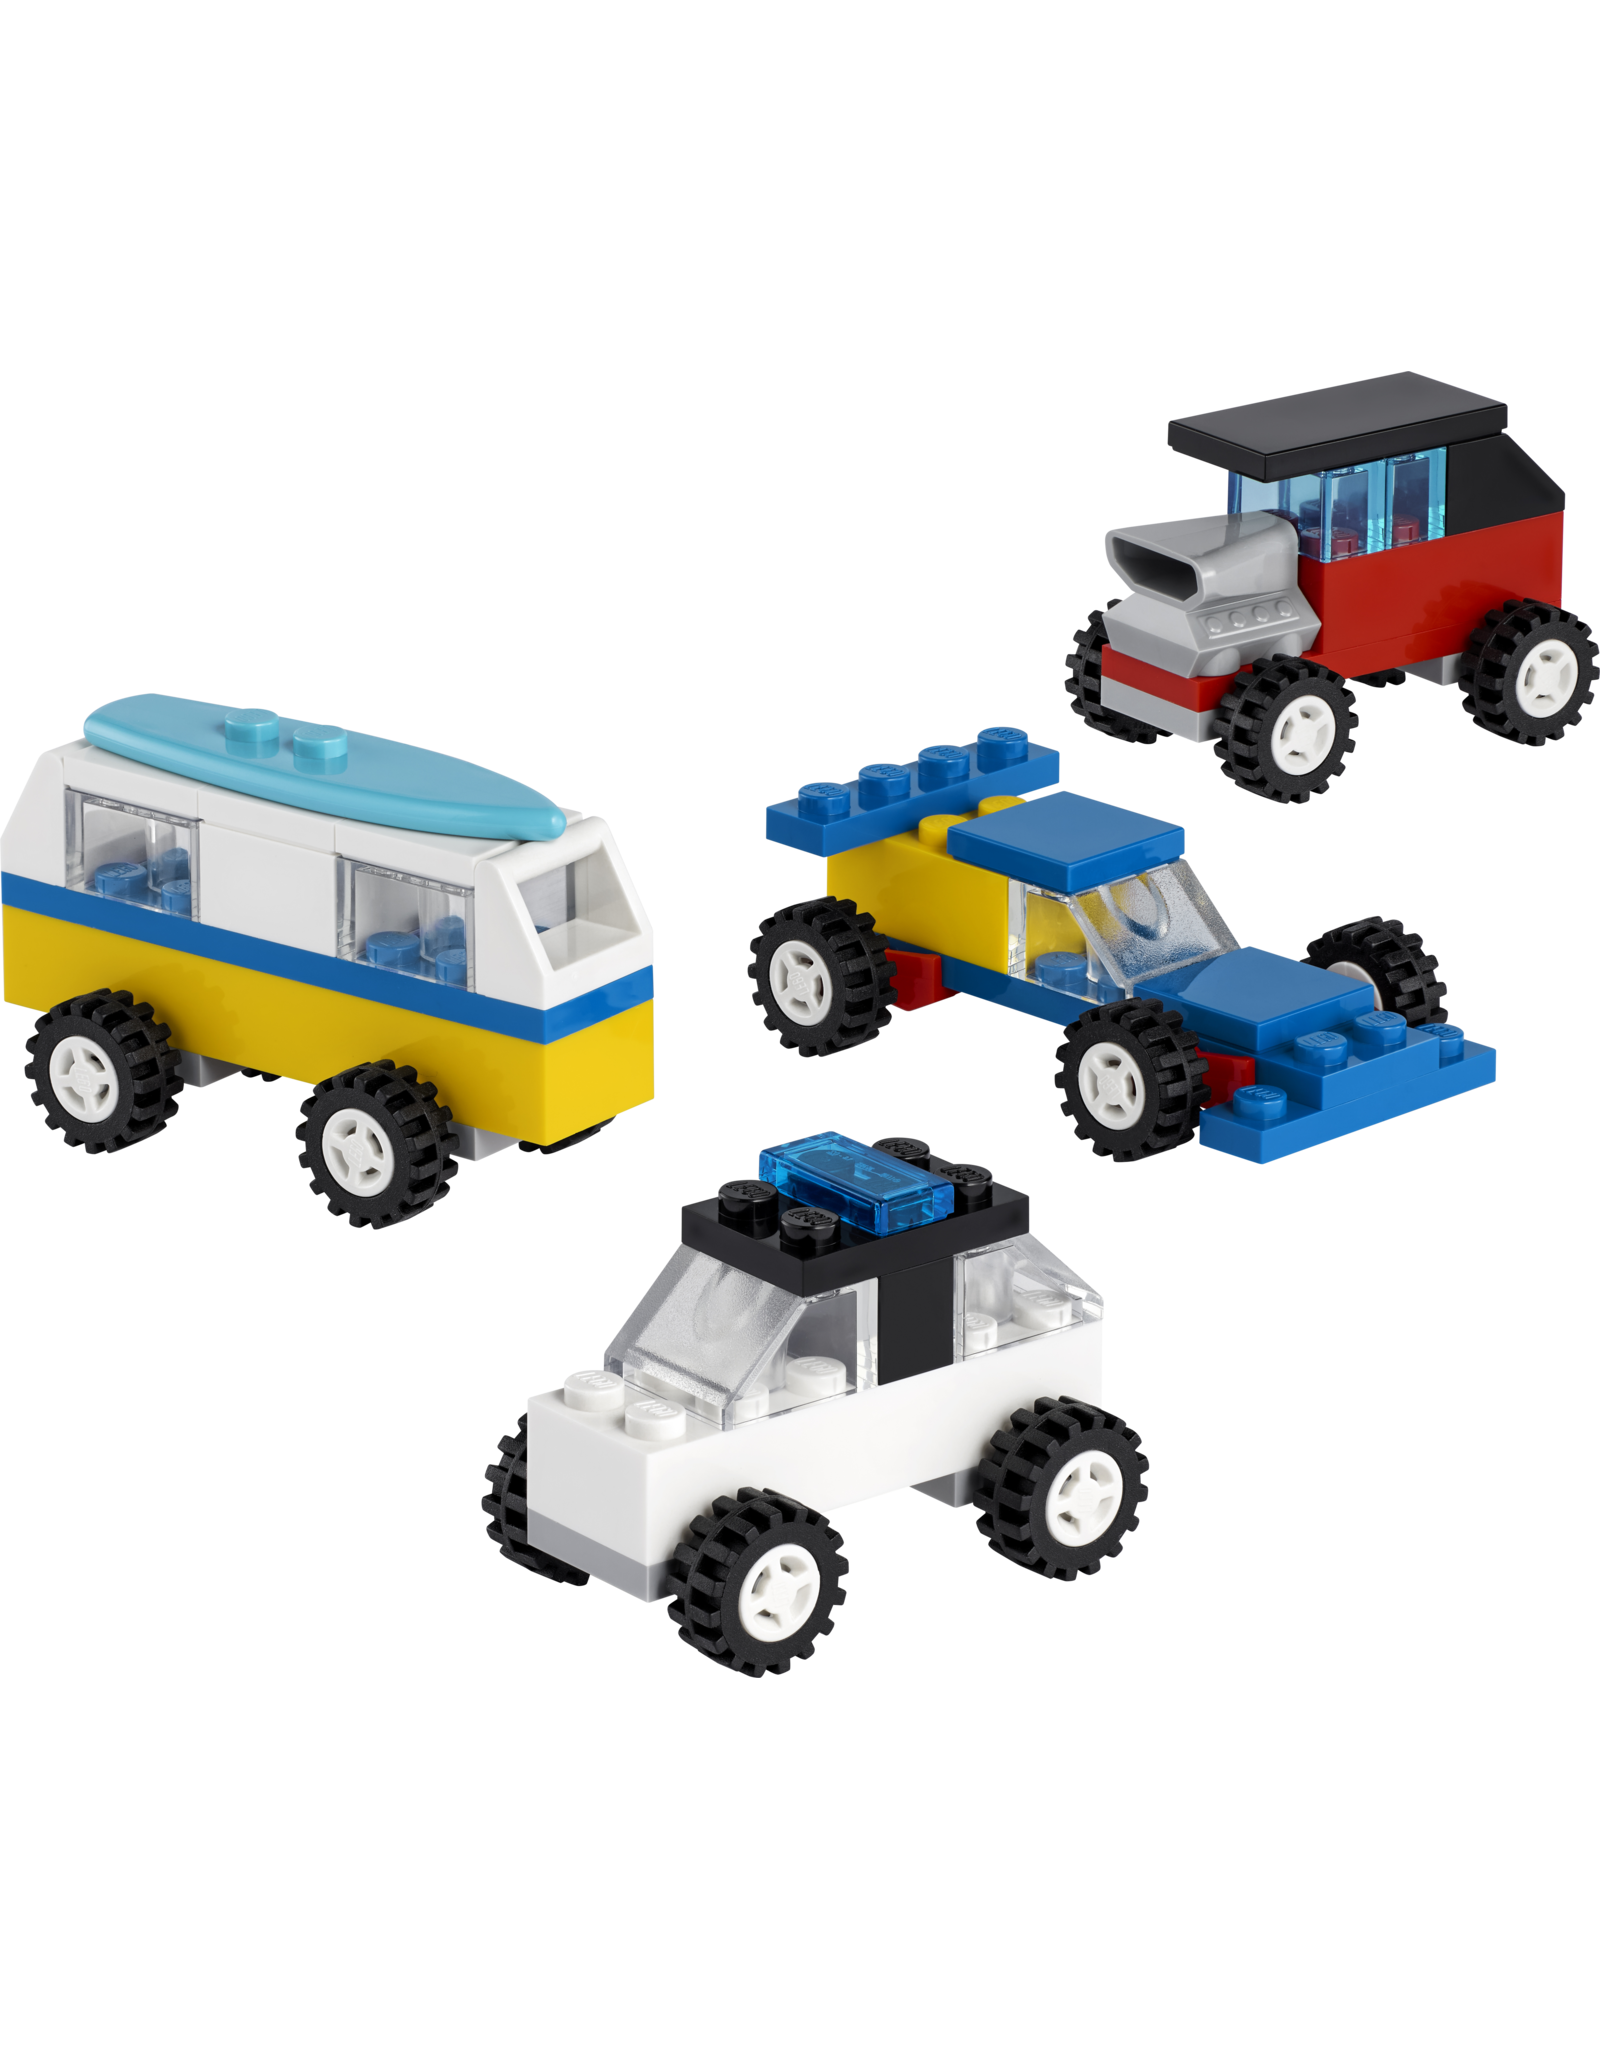 LEGO 30510 90 Years of Cars